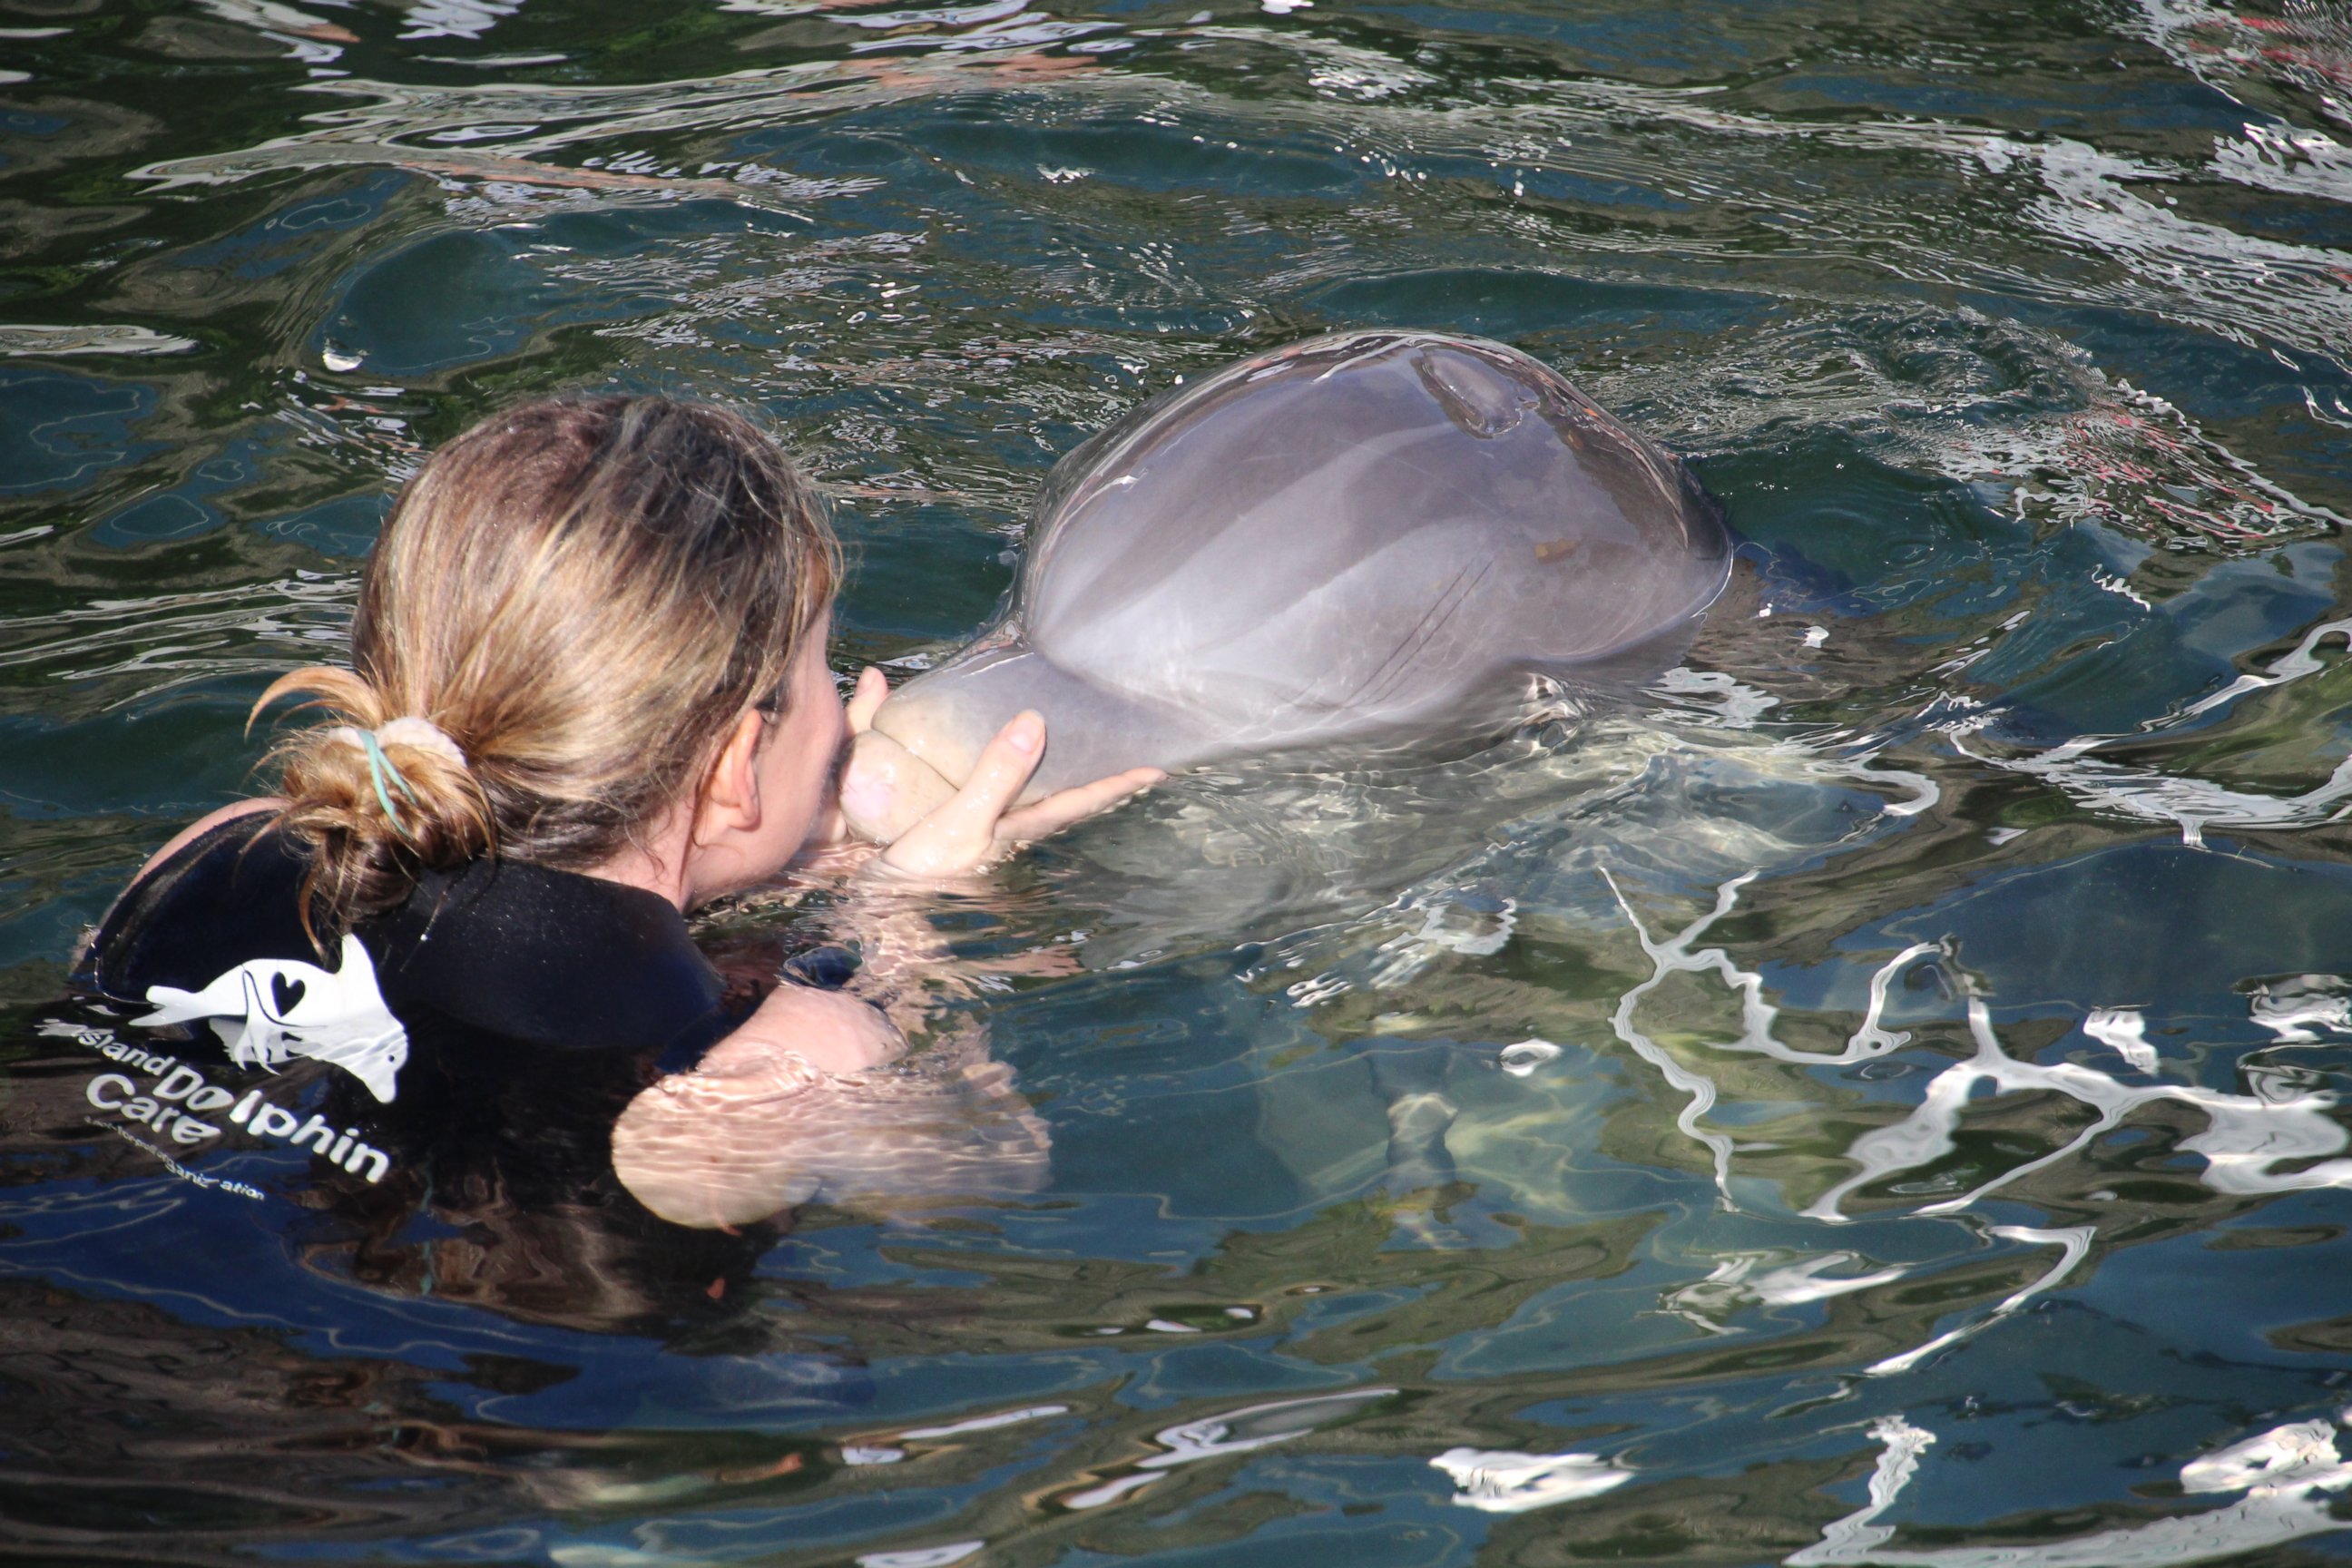 Jaycee Dugard is shown here swimming with dolphins in this family photo.